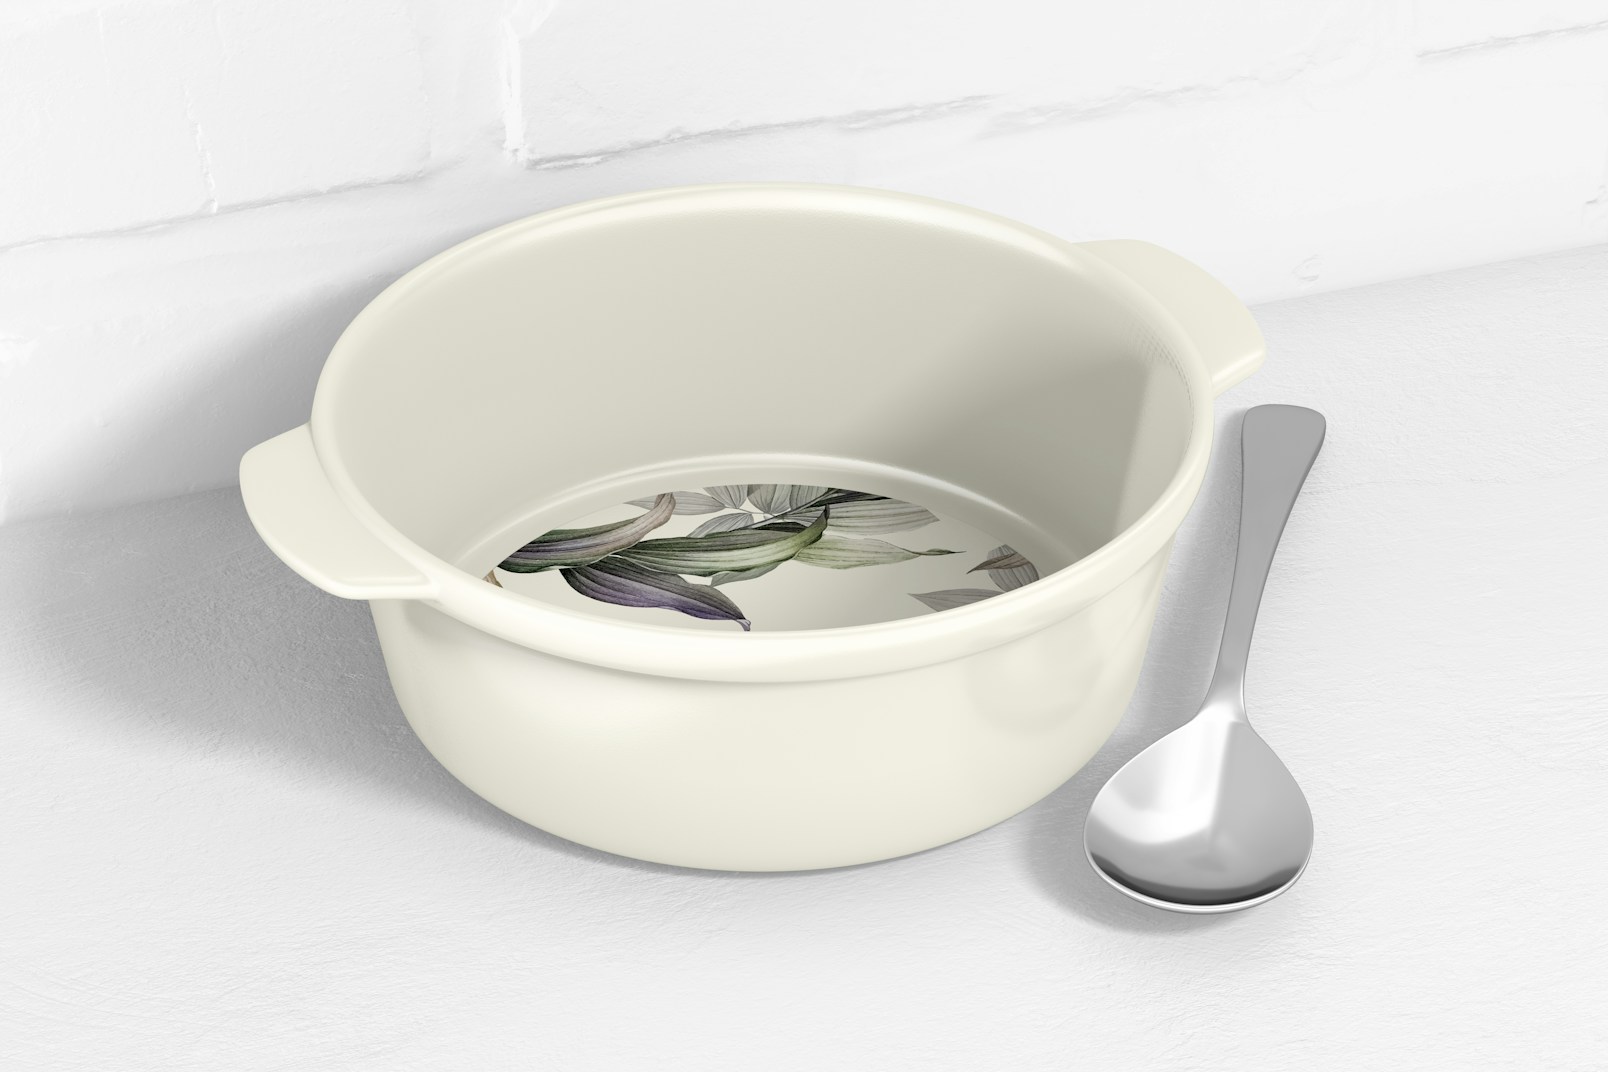 Round Ceramic Dish with Handles Mockup, with Spoon